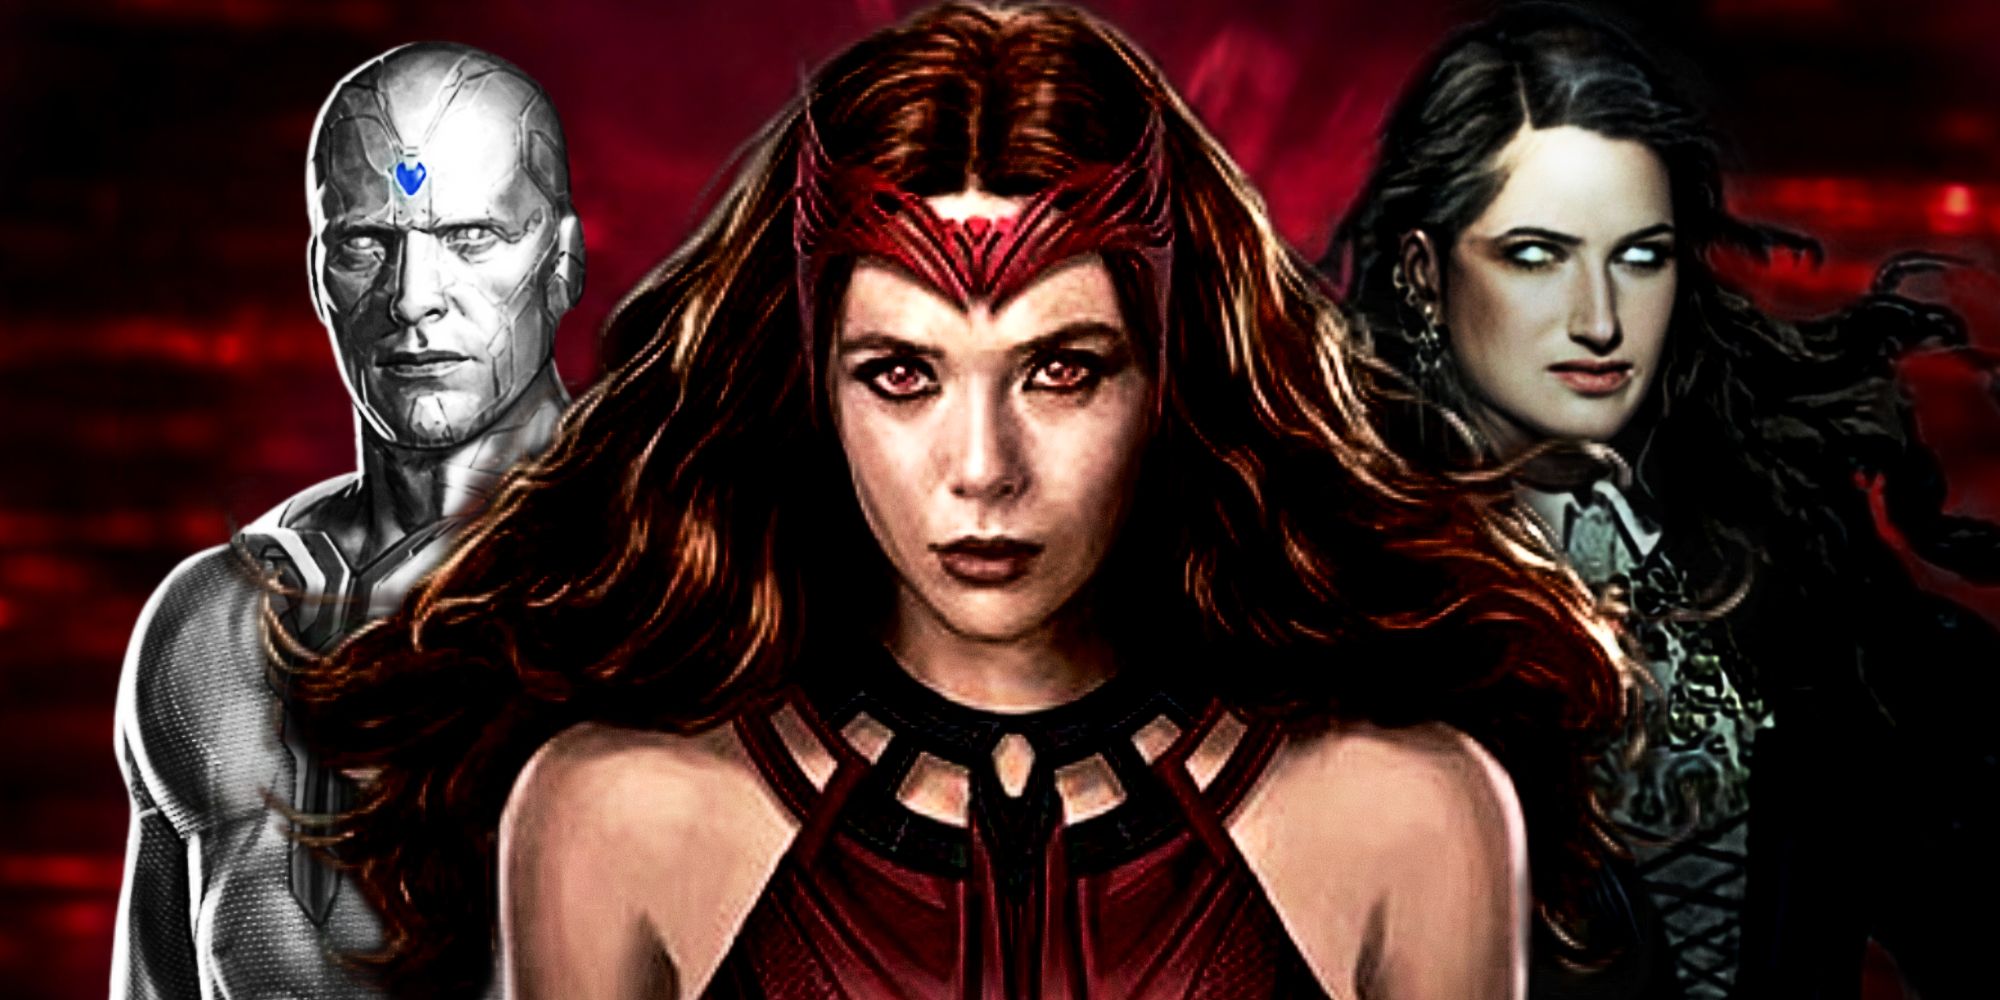 MCU Scarlet Witch in WandaVision with White Vision and Agatha Harkness